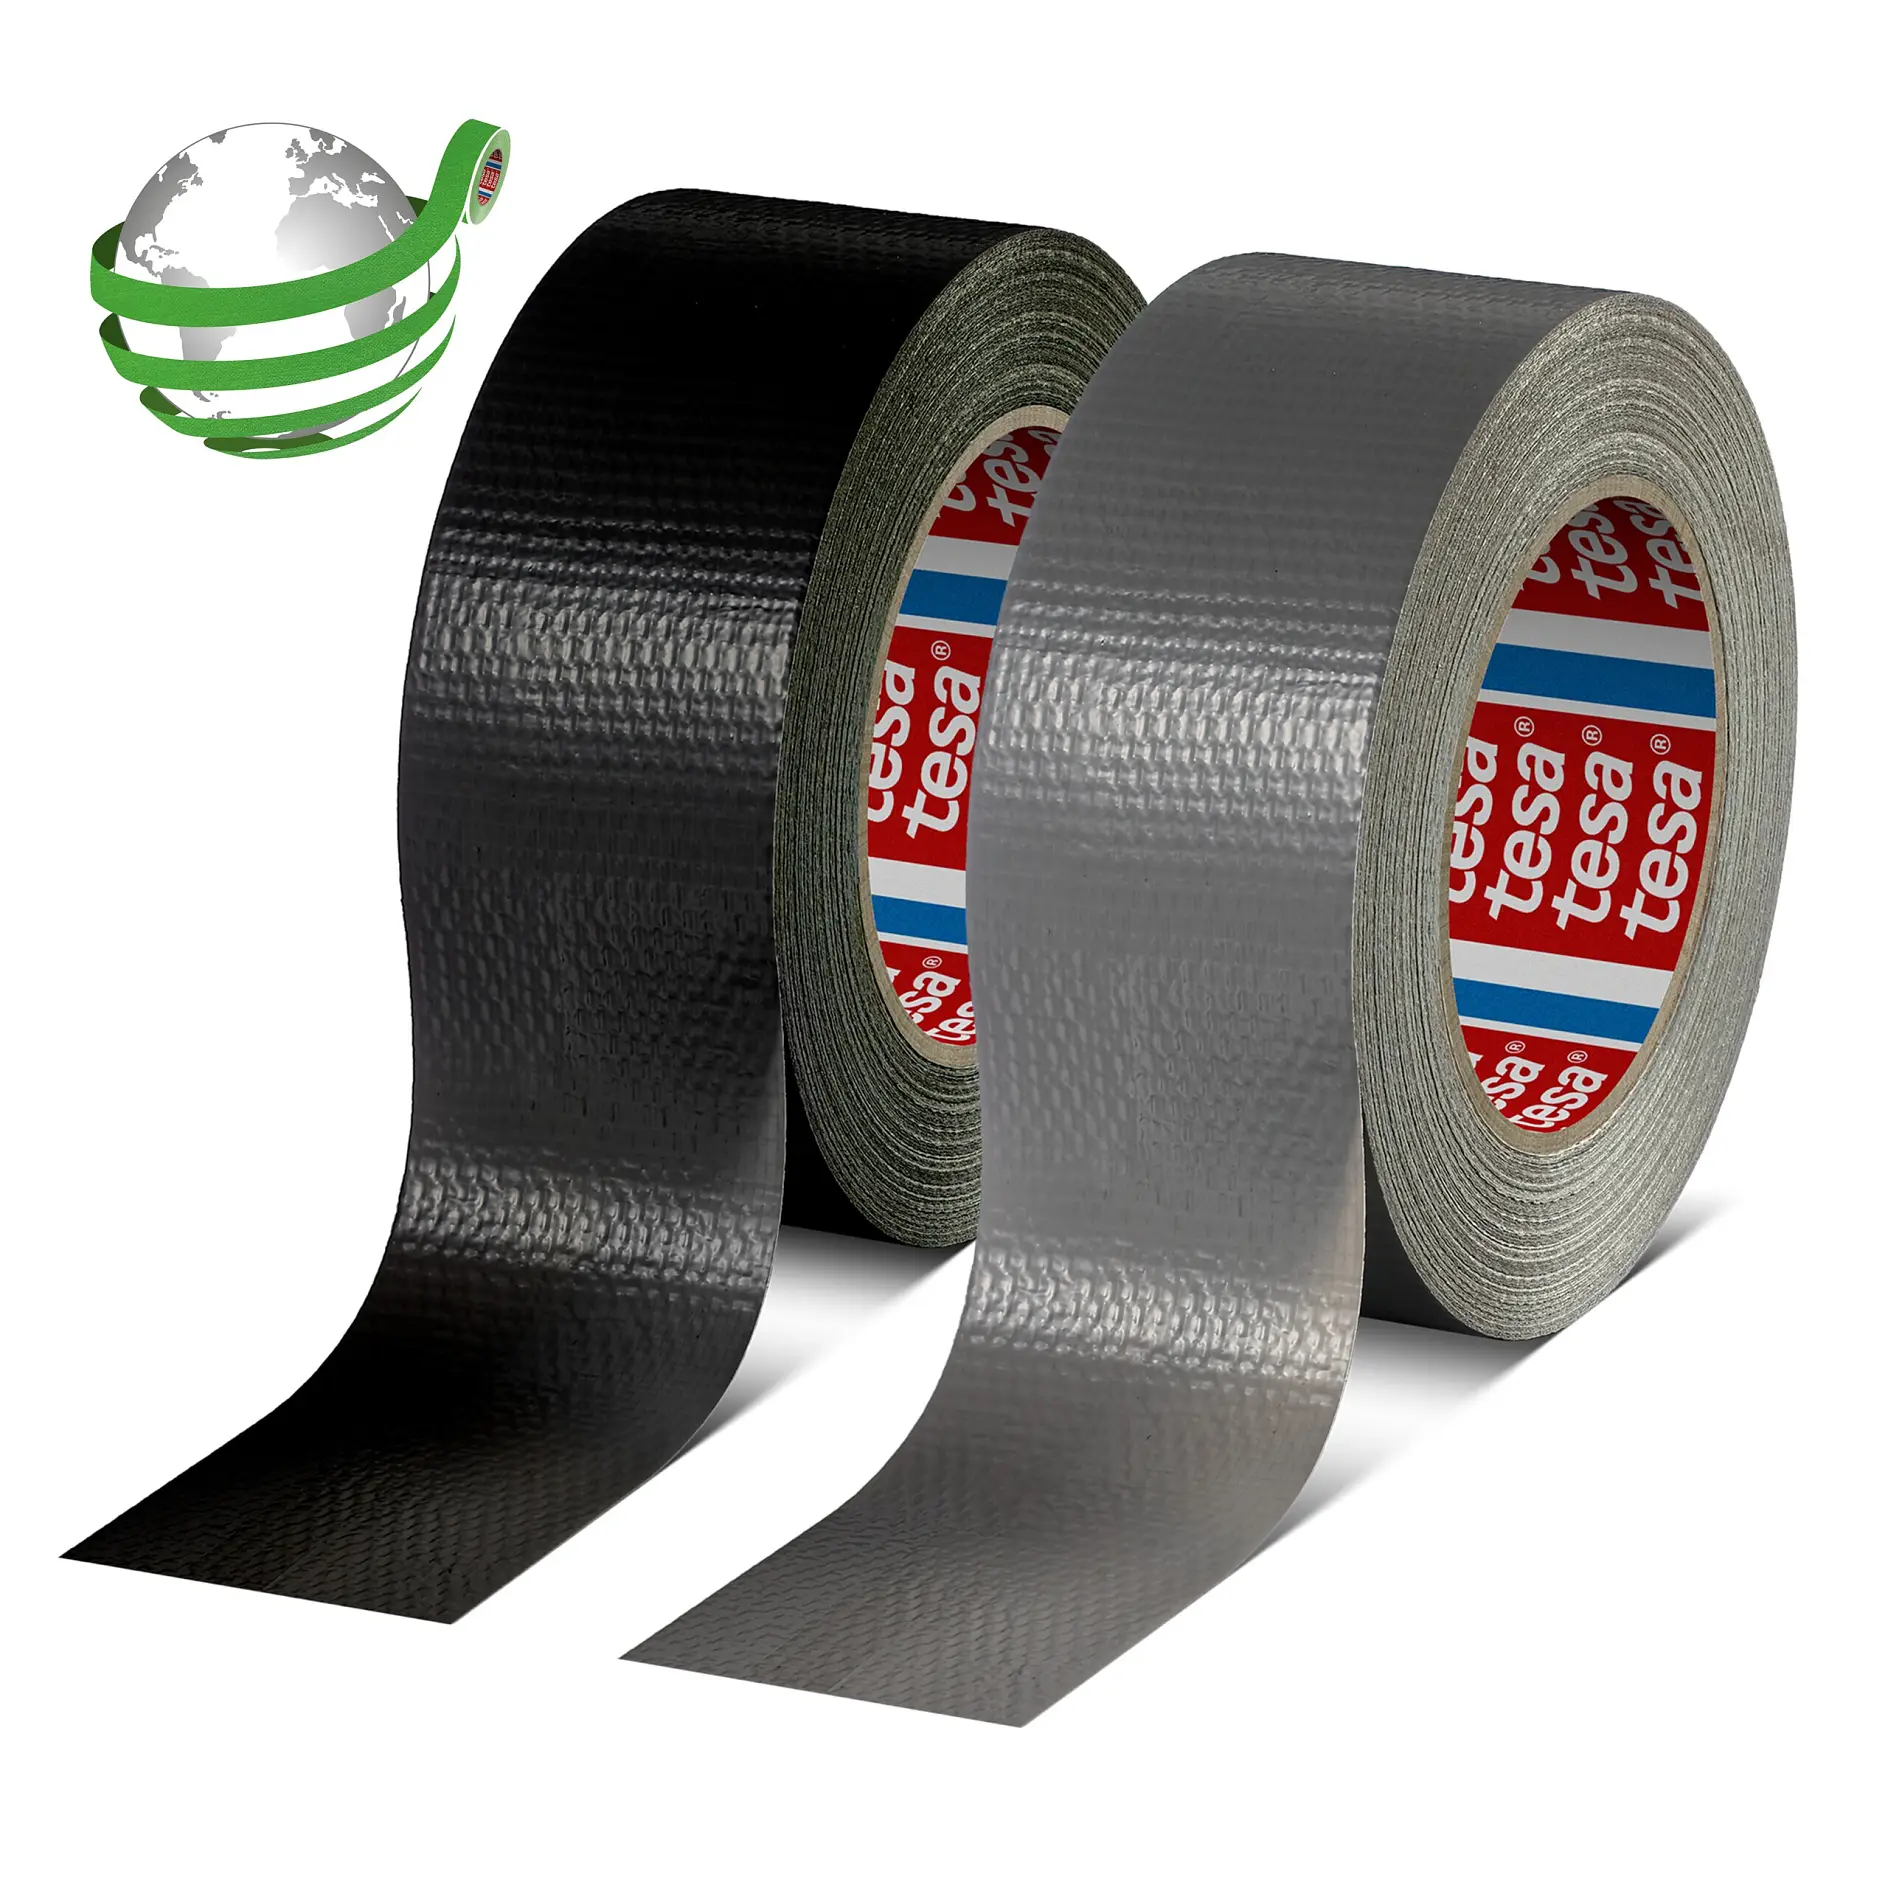 tesa-04615-PV1-general-purpose-duct-tape-31%-recycled-share-gray-family-pr